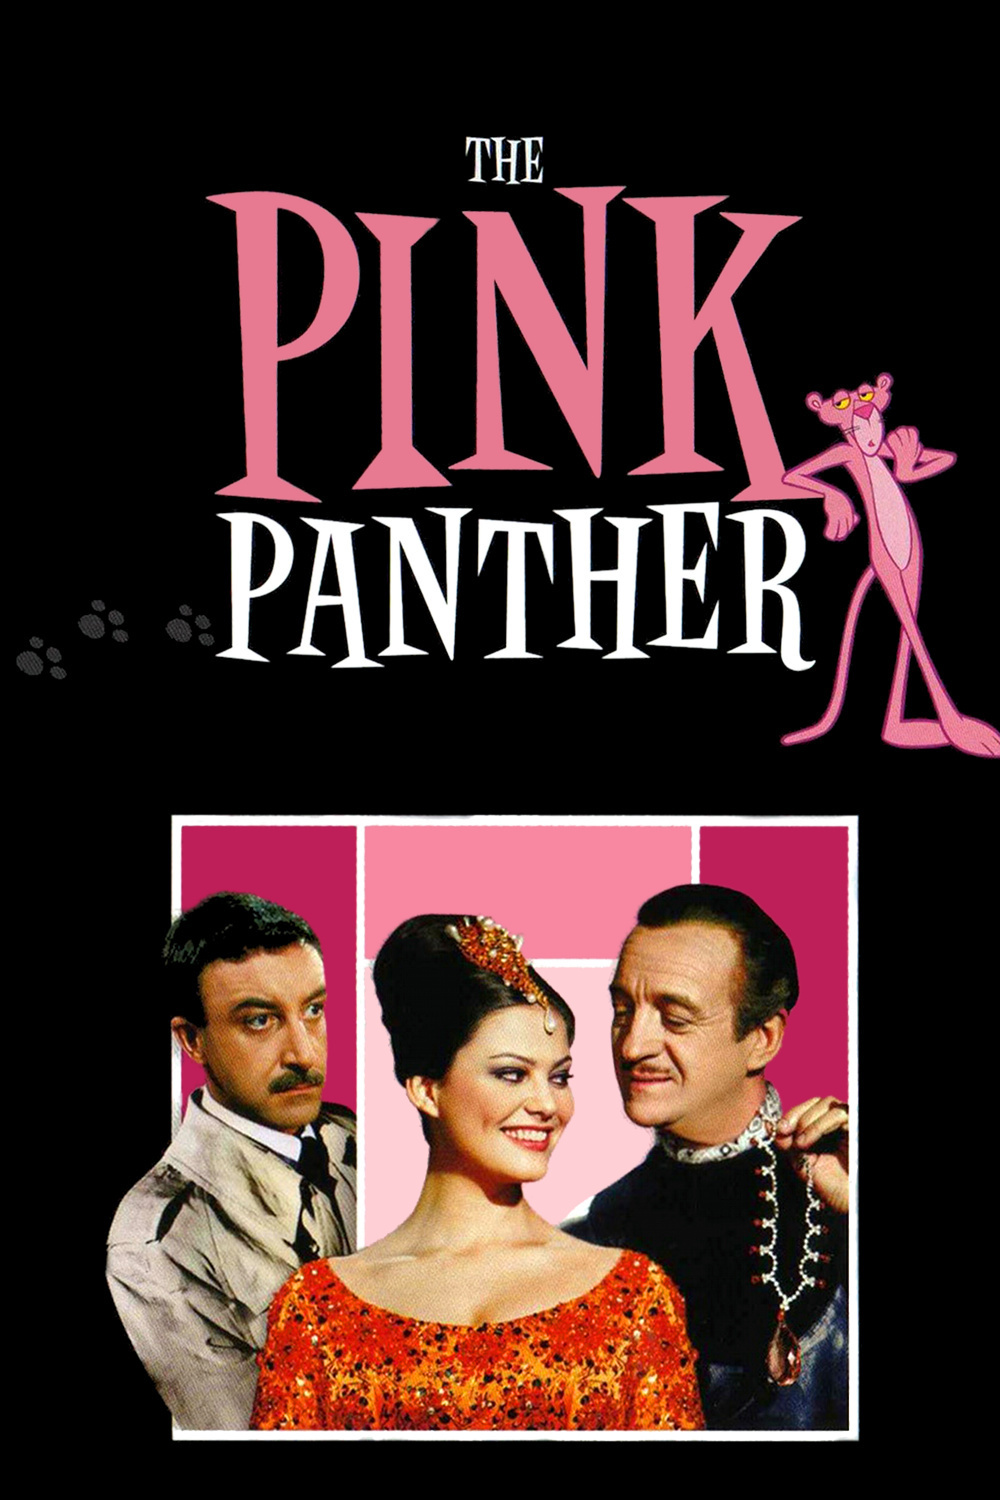 1964 The Pink Panther movie poster